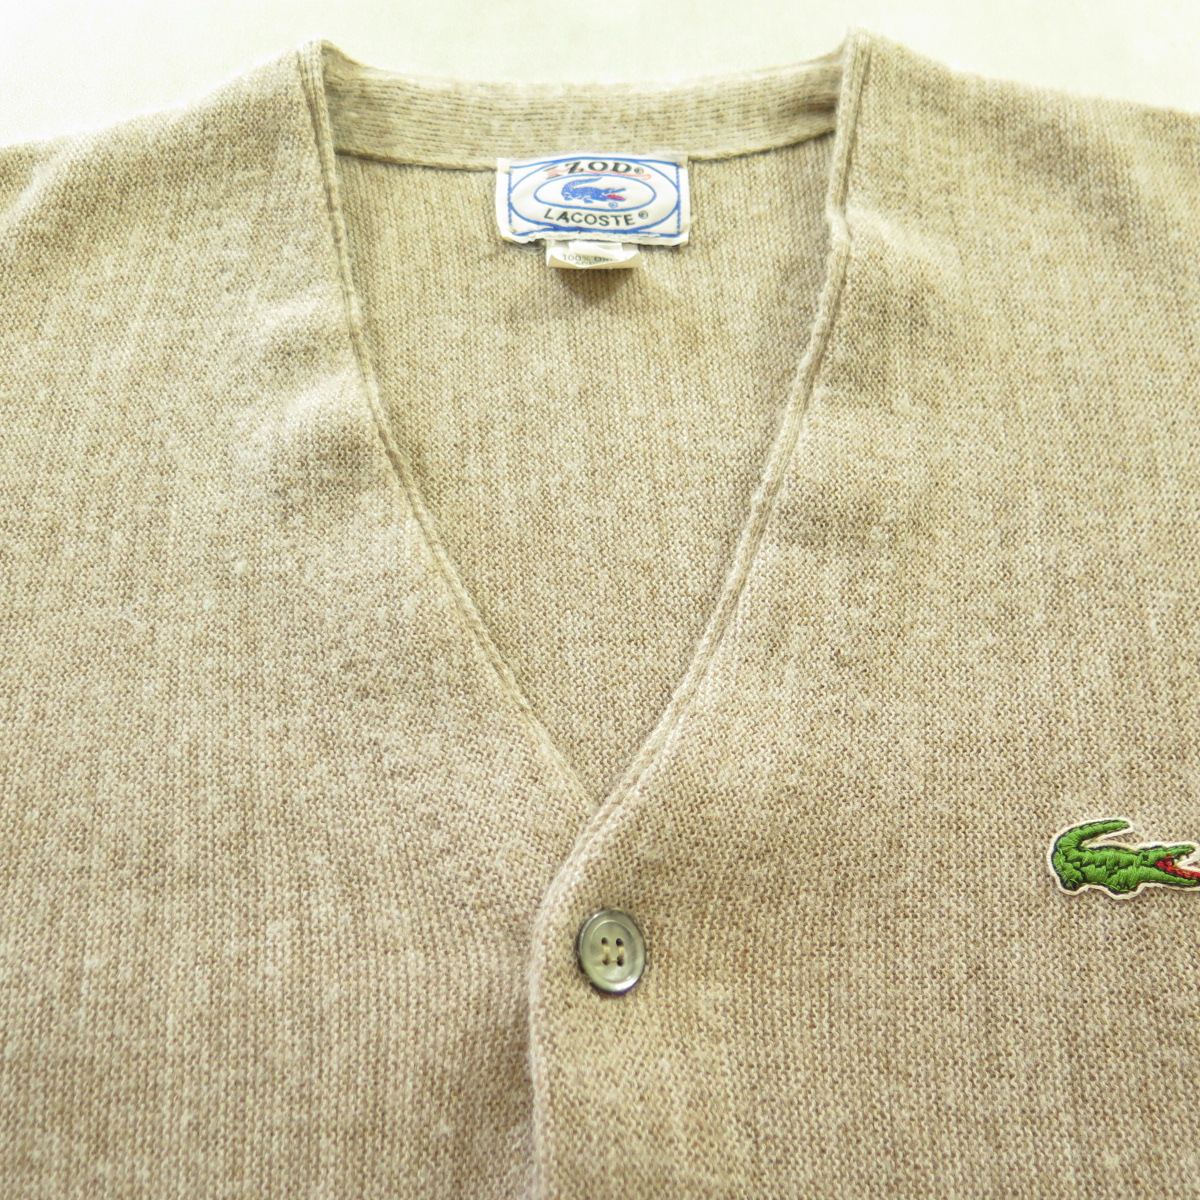 Vintage 80s Lacoste Cardigan Sweater Mens M Heather Brown USA made ...